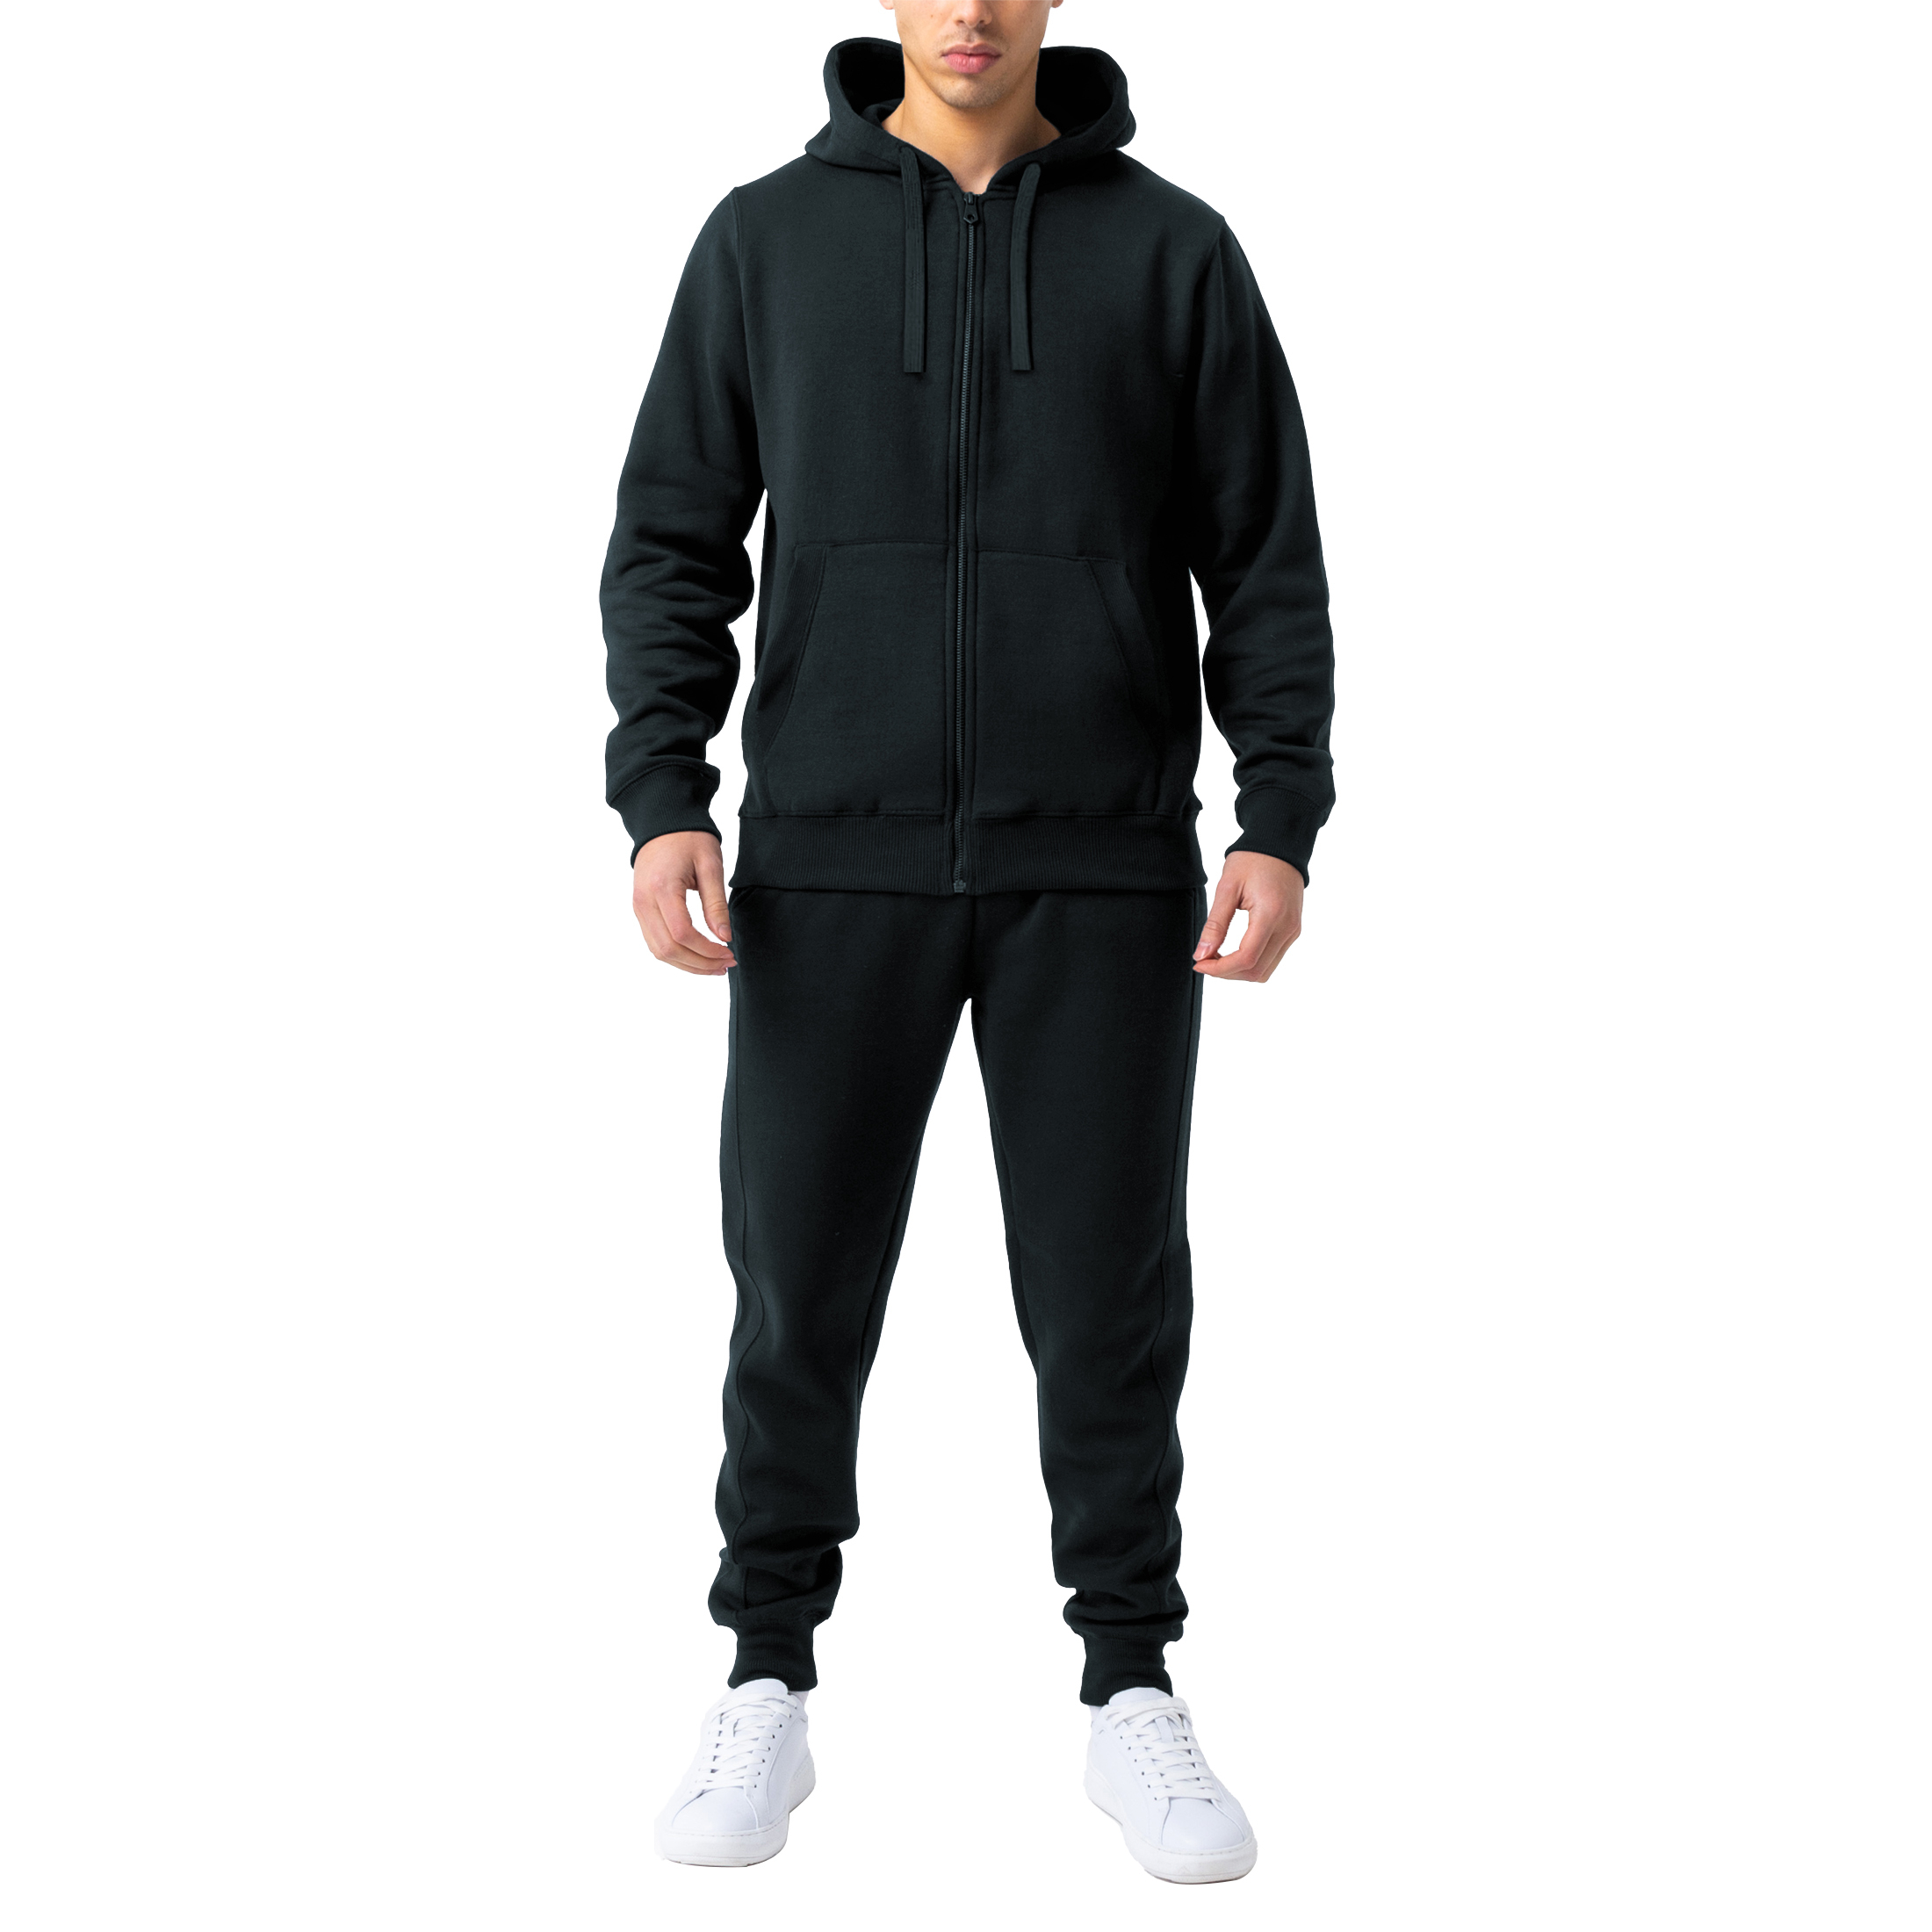 Men's Casual Jogging Athletic Active Full Zip Up Tracksuit - Black, X-Large